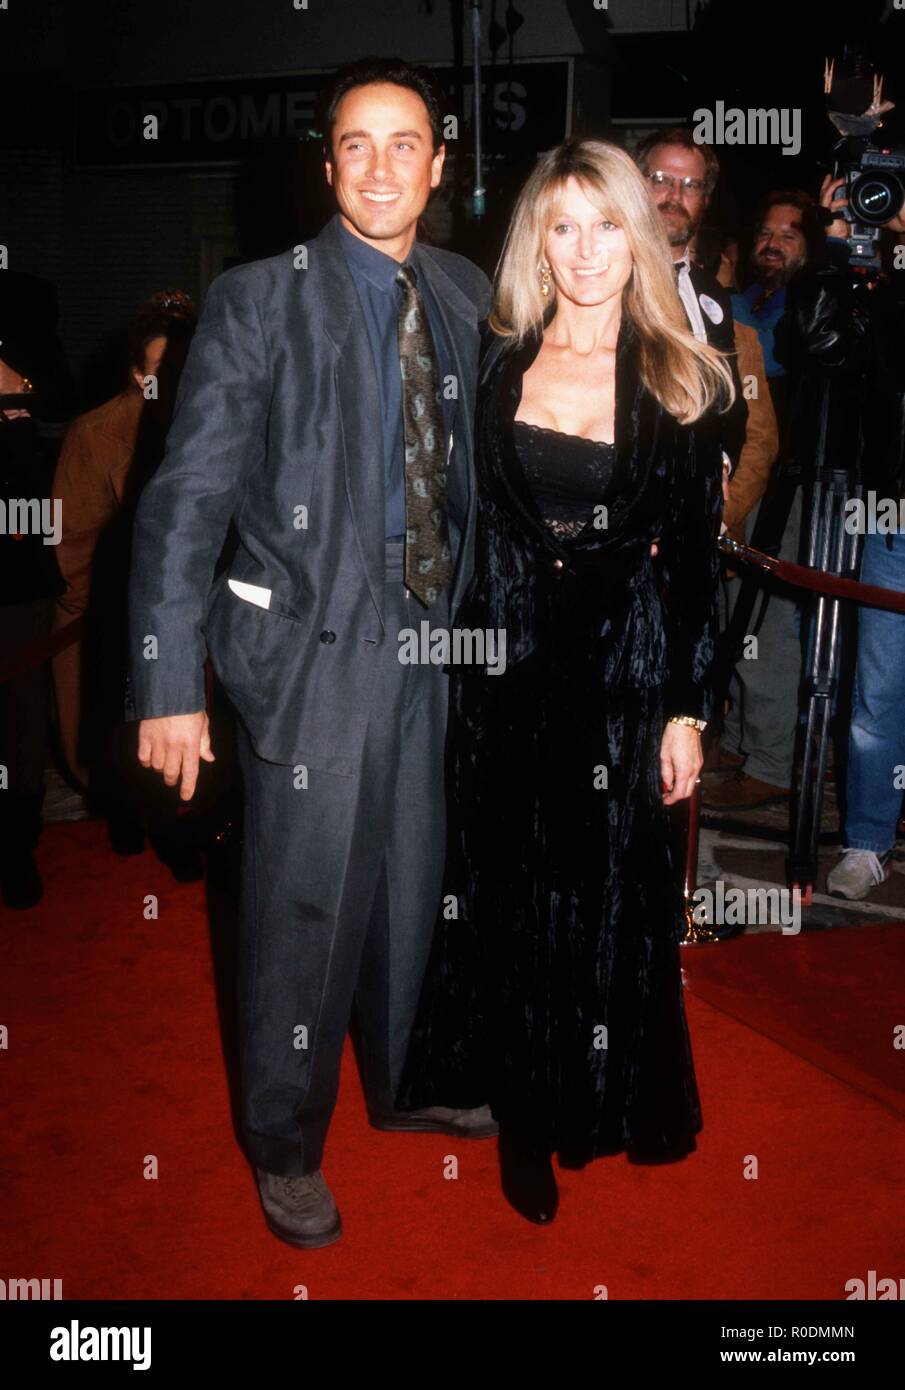 WESTWOOD, CA - DECEMBER 9: Actor Matt Lattanzi and Rona Newton-John attend Columbia Pictures' 'A Few Good Men' Premiere on December 9, 1992 at Mann Village Theatre in Westwood, California. Photo by Barry King/Alamy Stock Photo Stock Photo